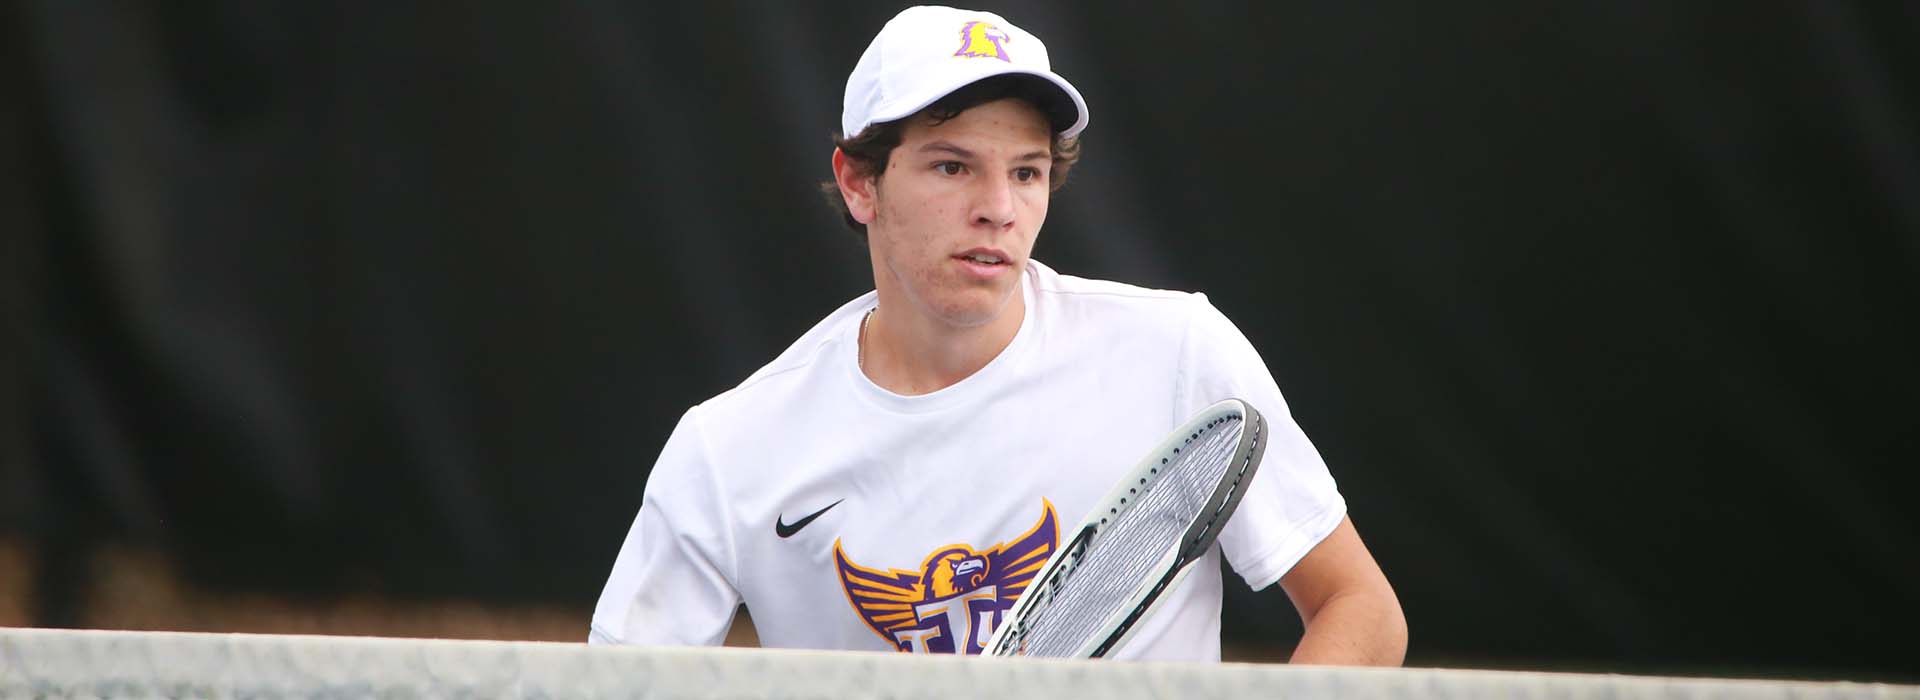 Tech tennis drops 6-1 decision at Kennesaw State